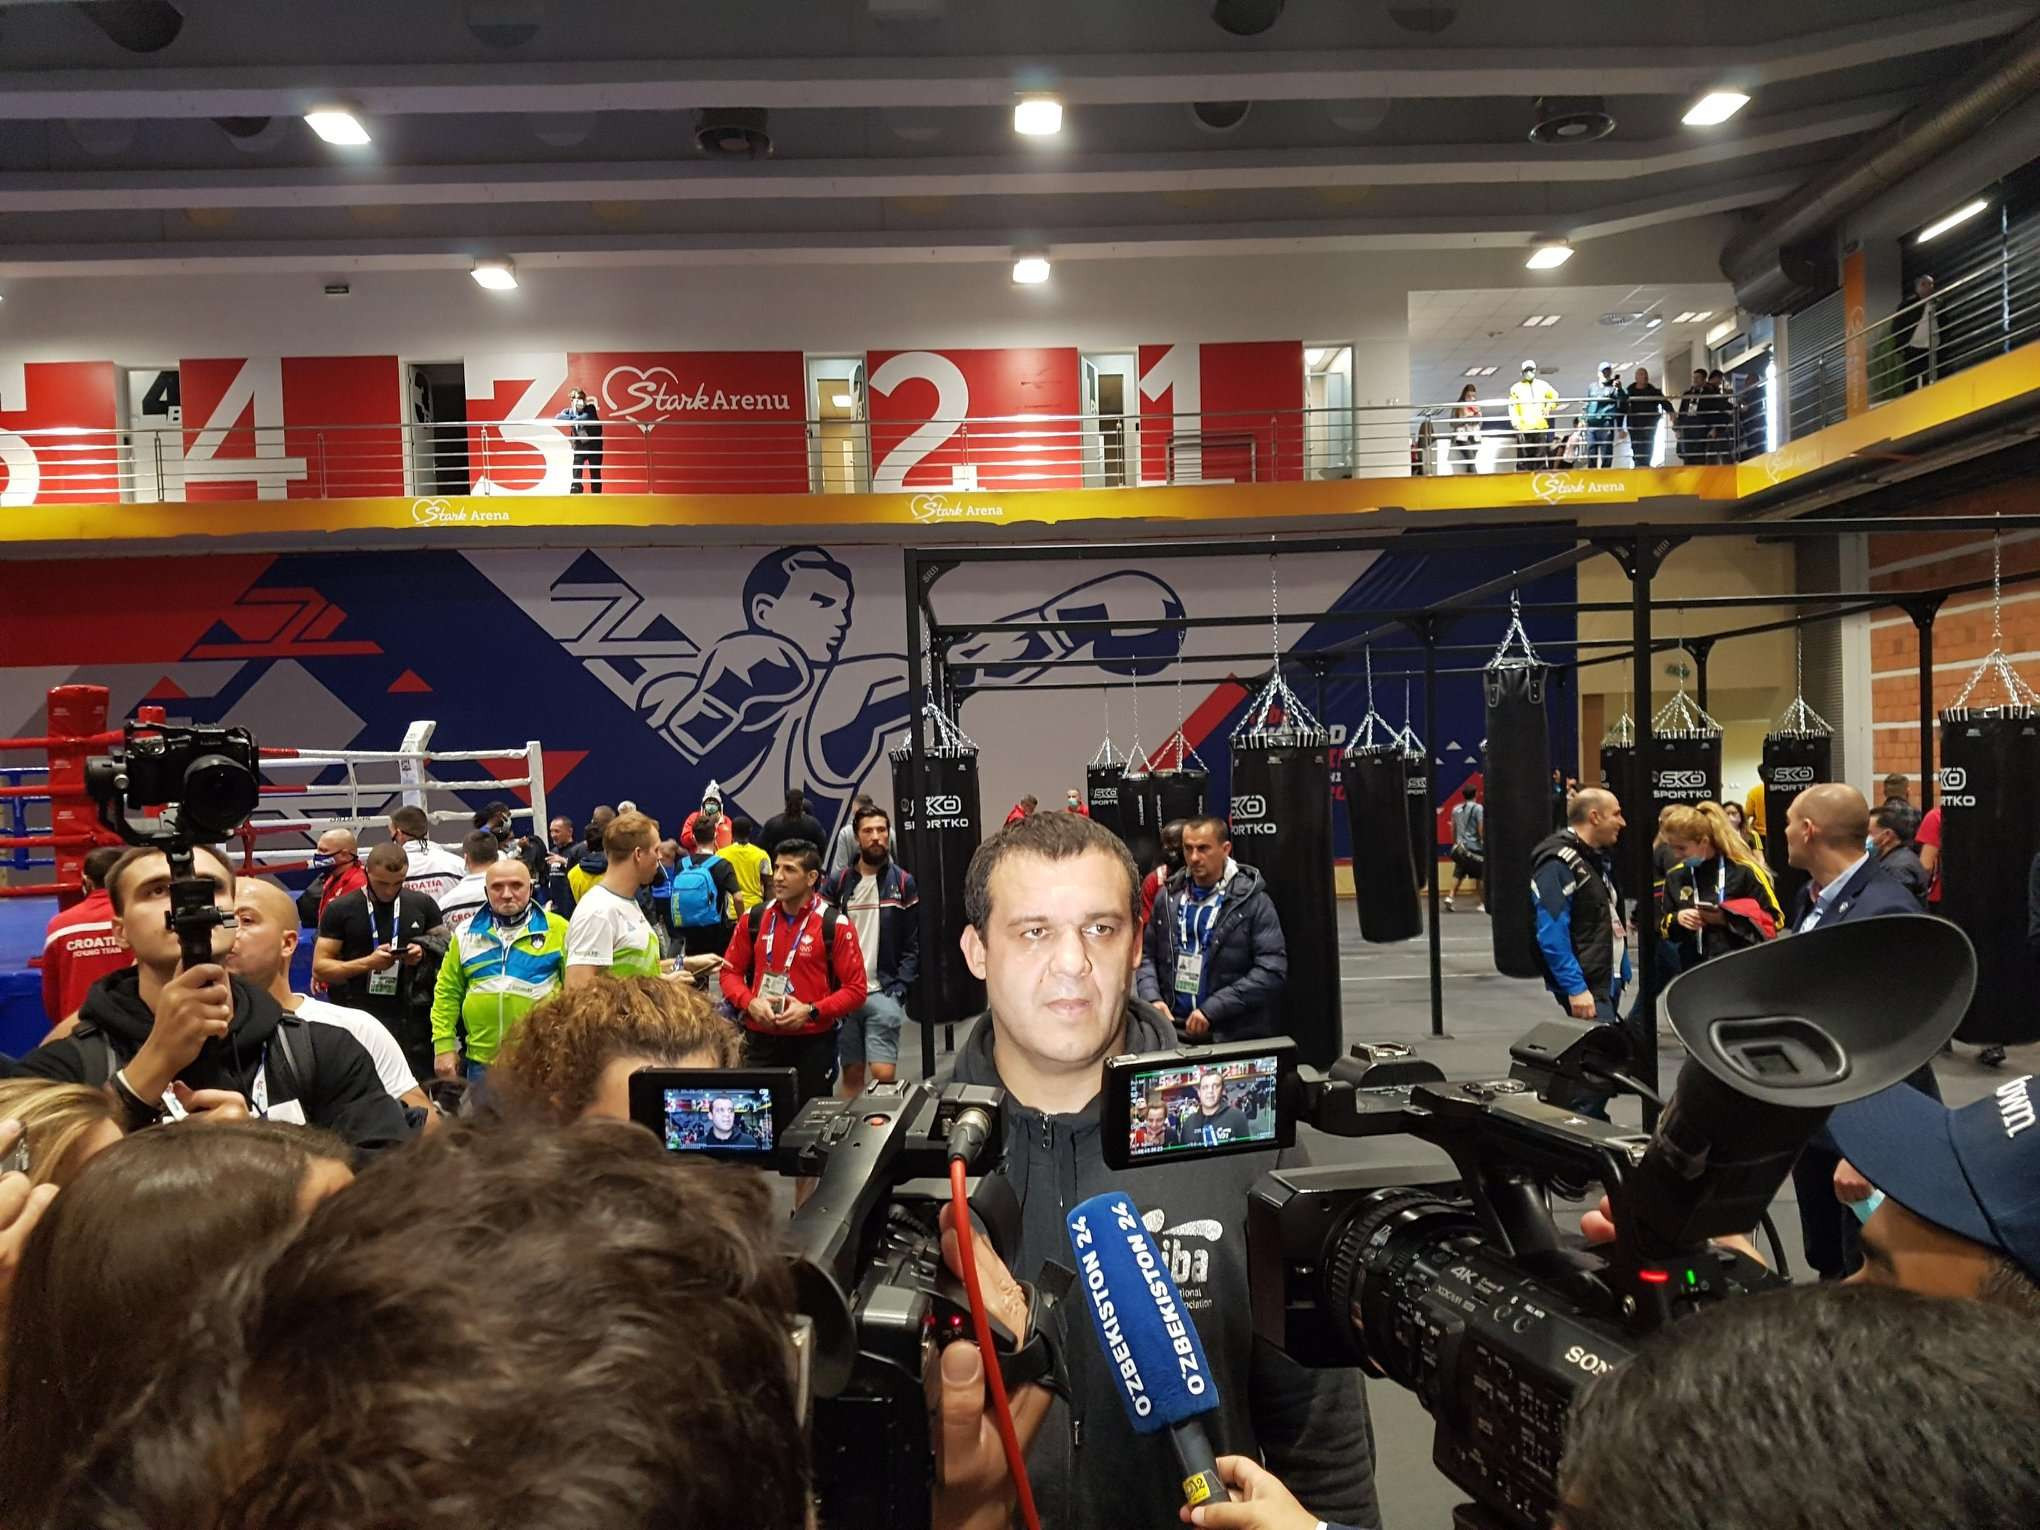 AIBA President Umar Kremlev met with athletes and media at the training day ©ITG